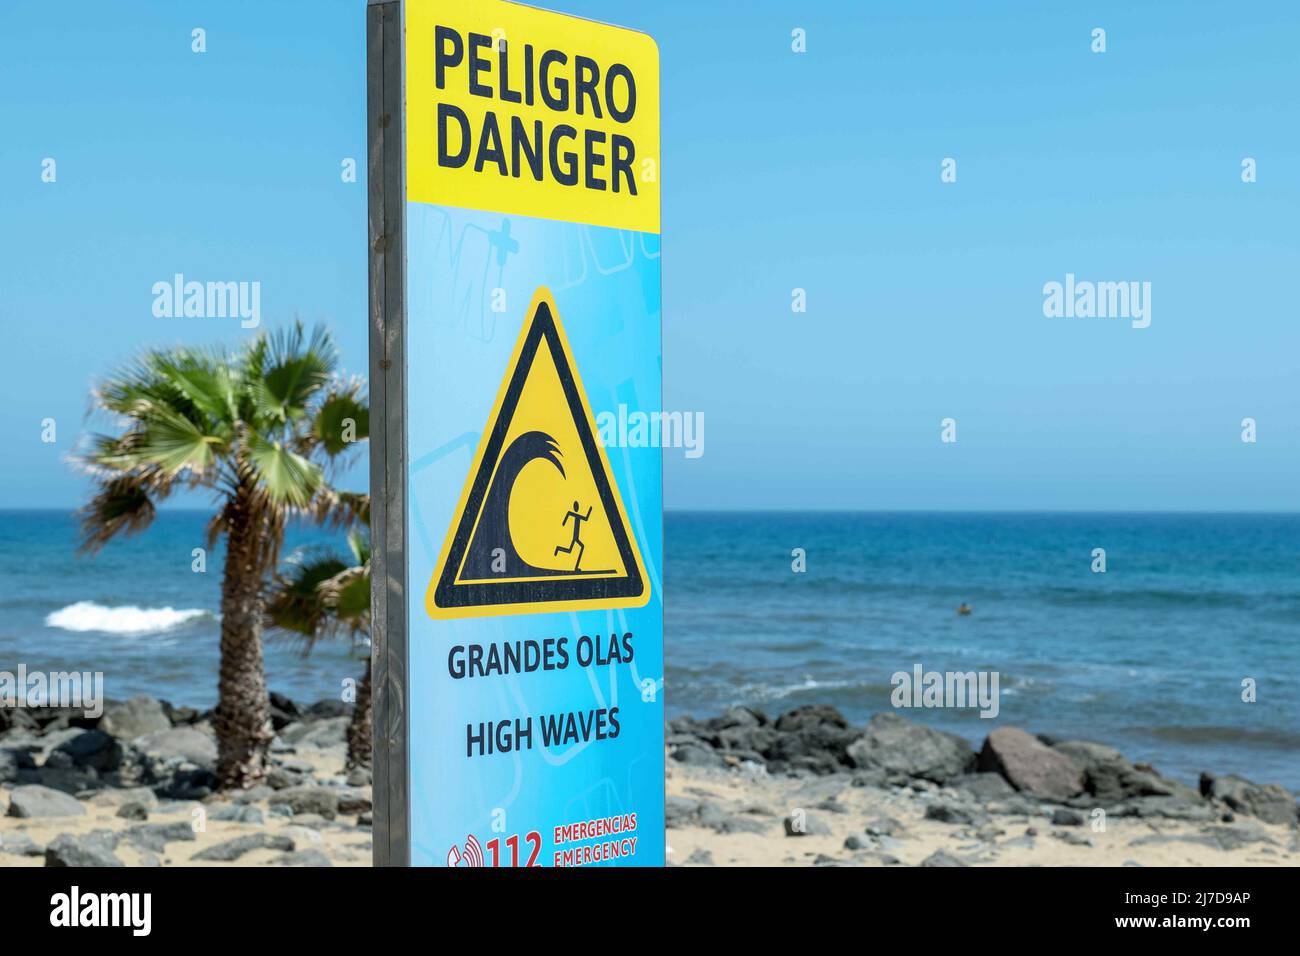 Warning sign on the beach about high waves, Spanish and English. Stock Photo